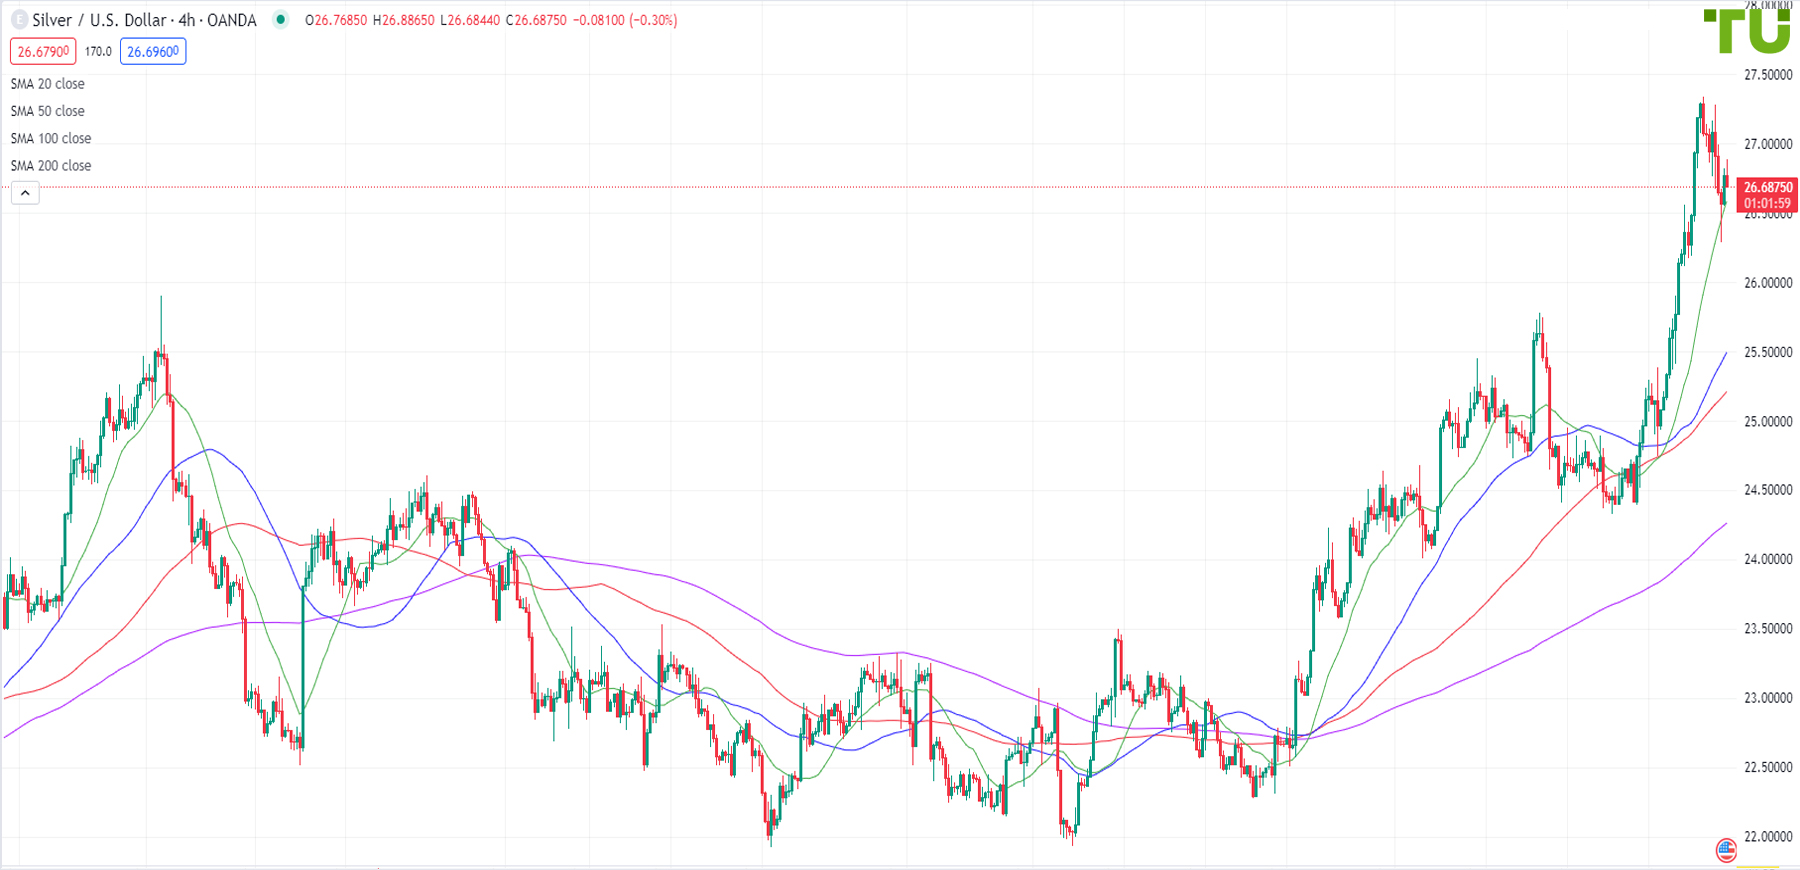 XAG/USD sold off from resistance at .28 per ounce